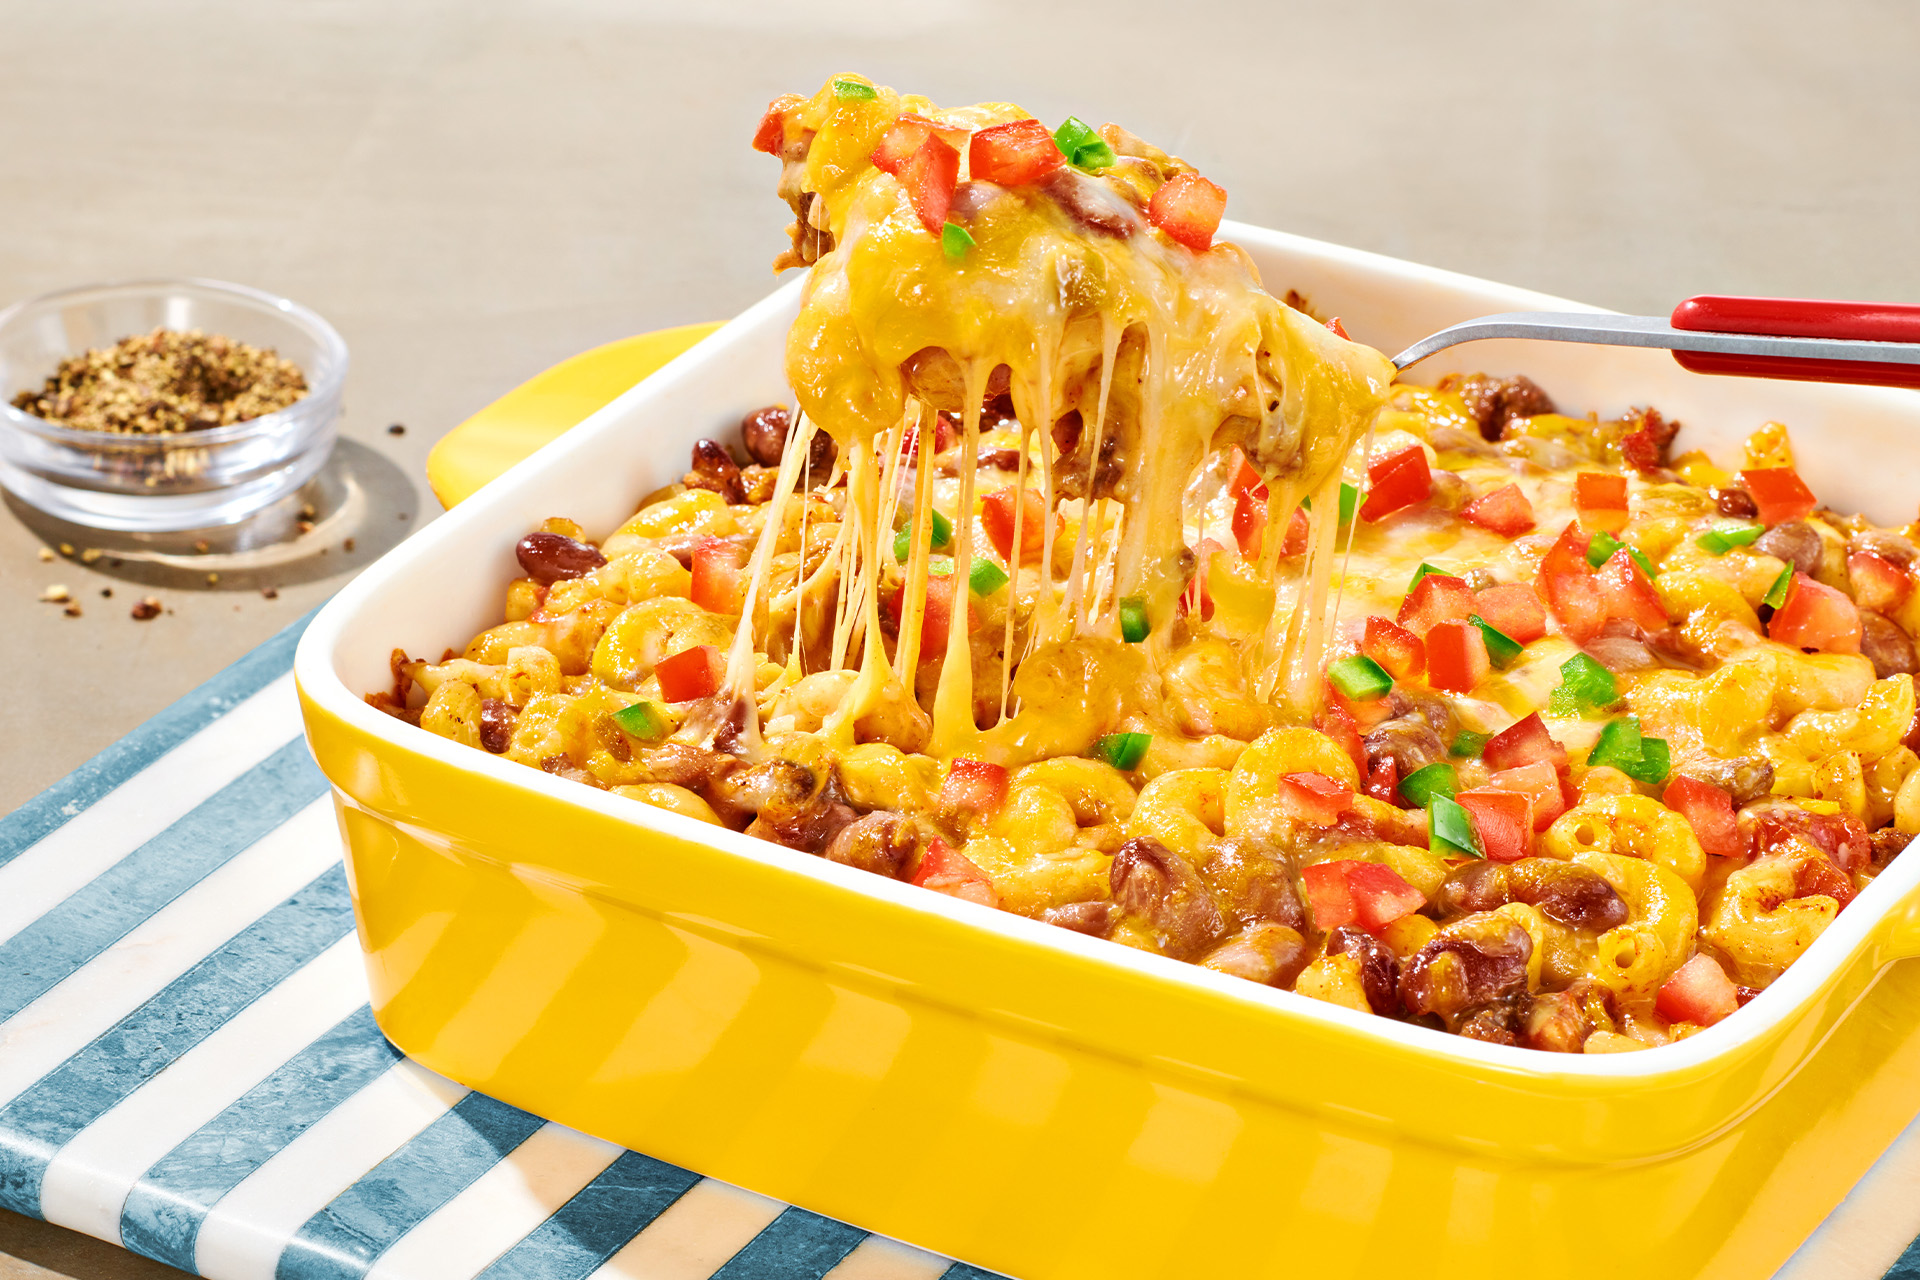 A spoon taking a scoop of a baked Mexican chili bean, macaroni and cheese casserole topped with tomato in yellow baking dish